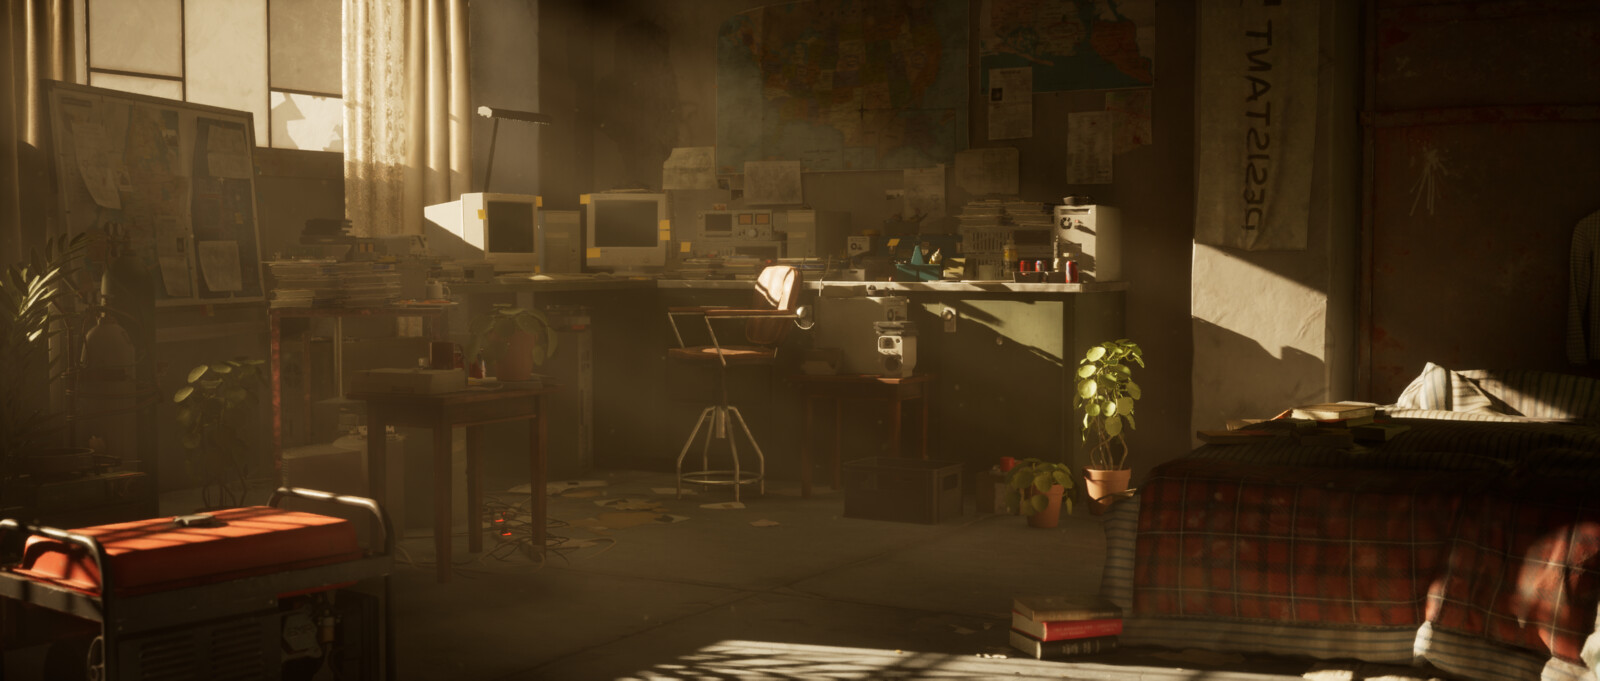 The Room-Interior real time rendering-Unreal Engine project